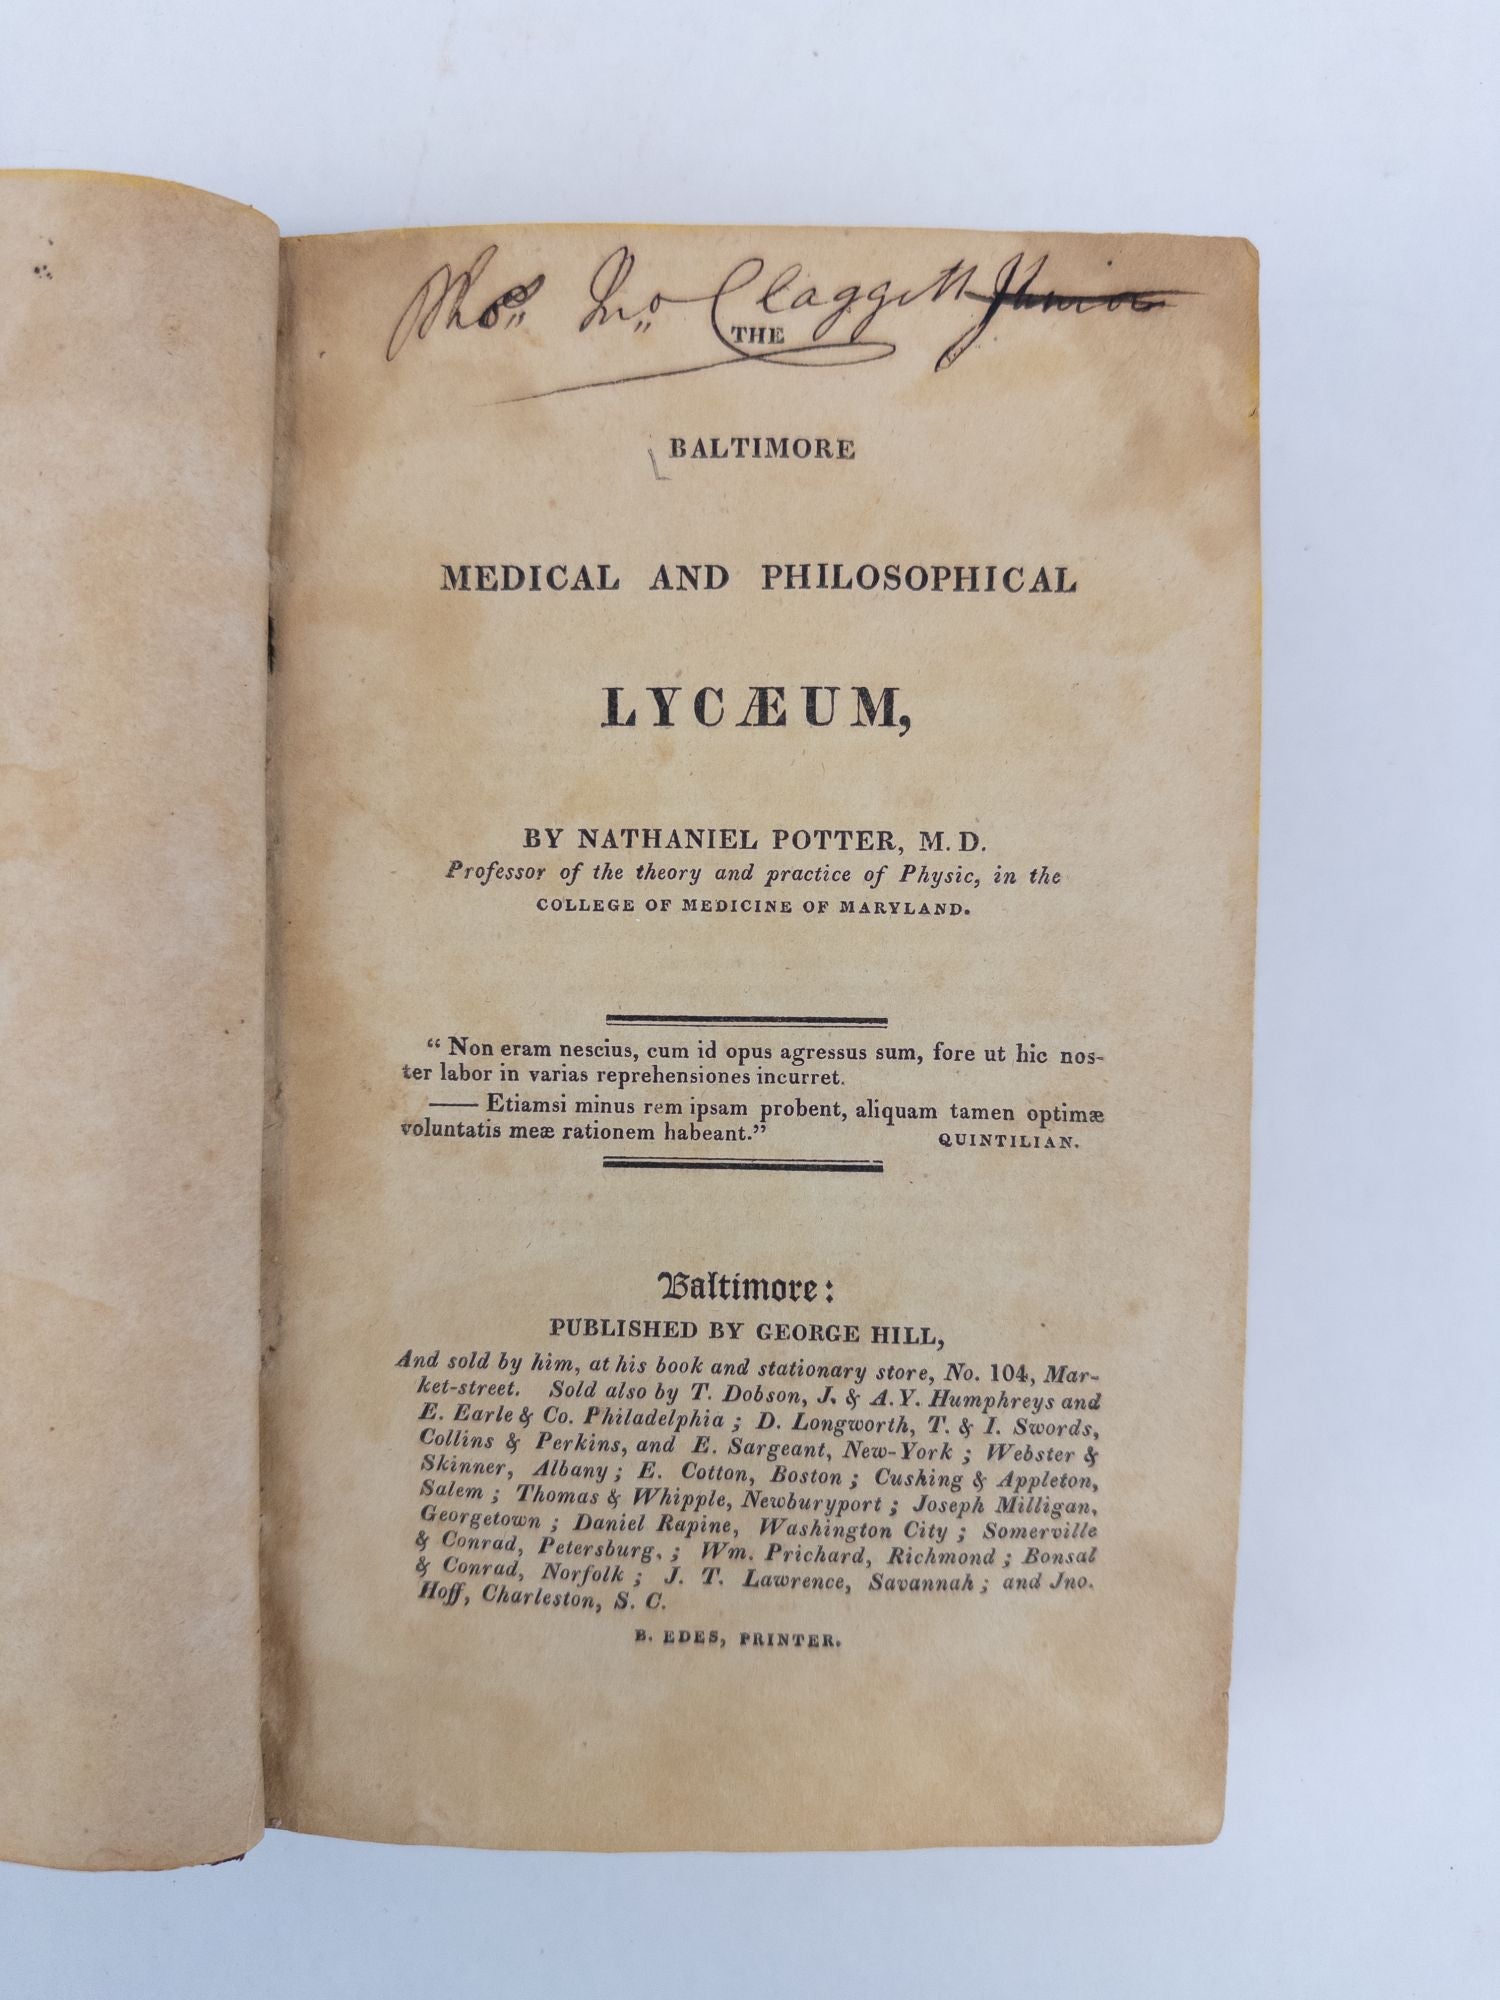 Product Image for THE BALTIMORE MEDICAL AND PHILOSOPHICAL LYCAEUM